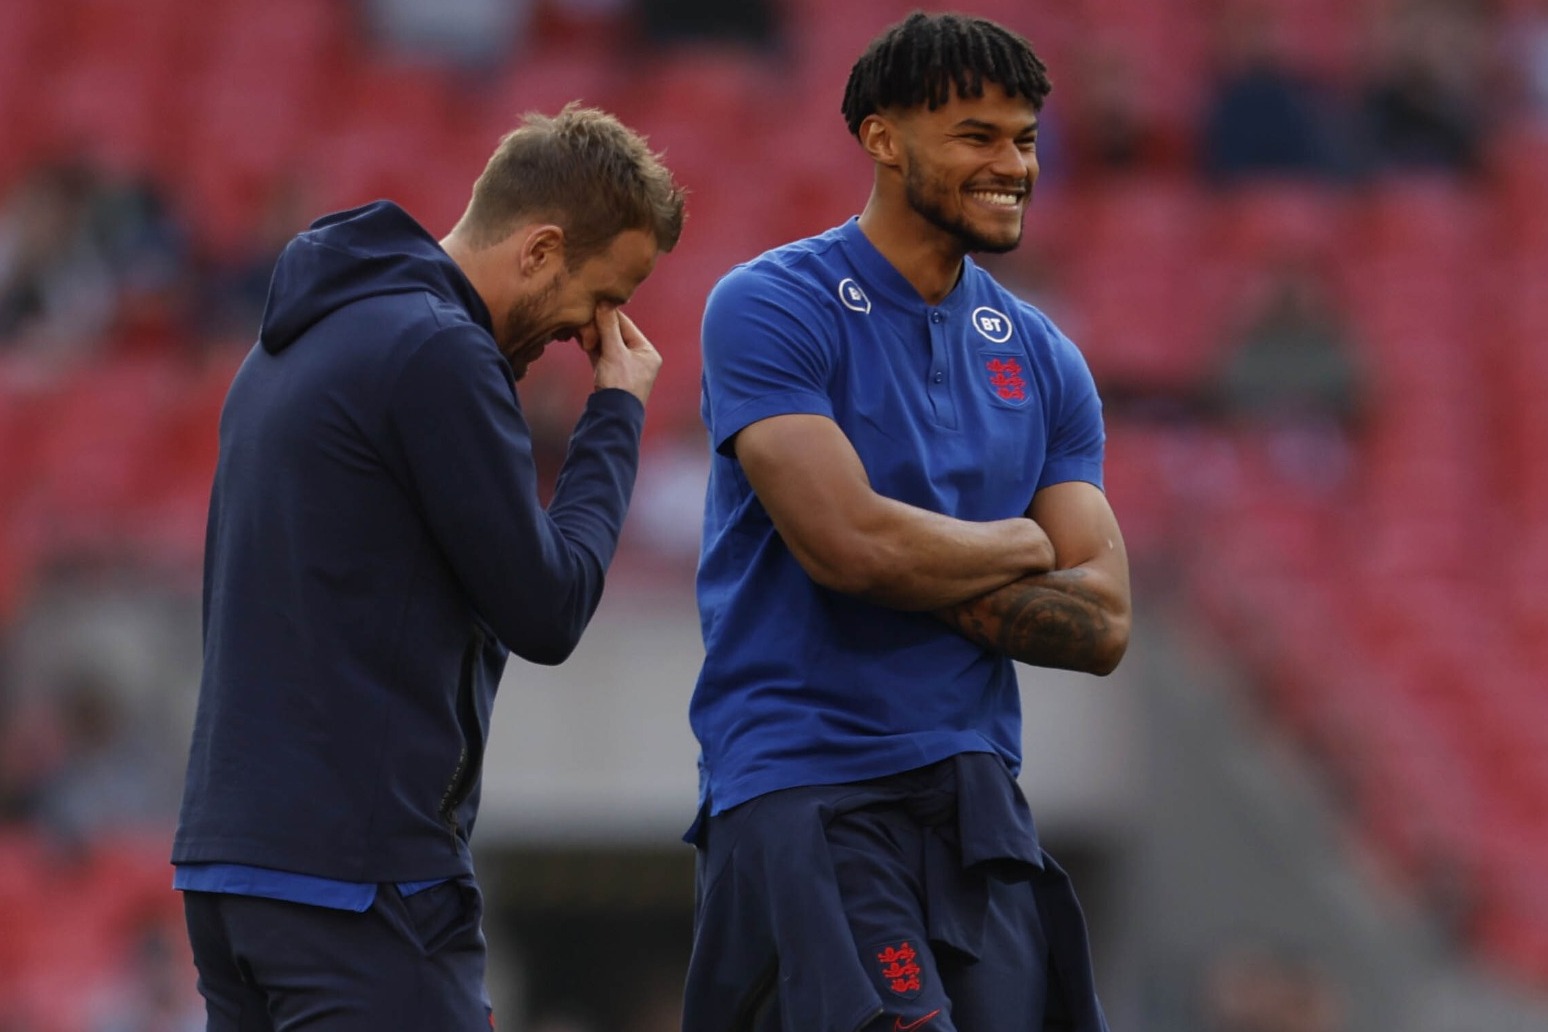 Tyrone Mings aiming to impress as England continue preparations for World Cup 